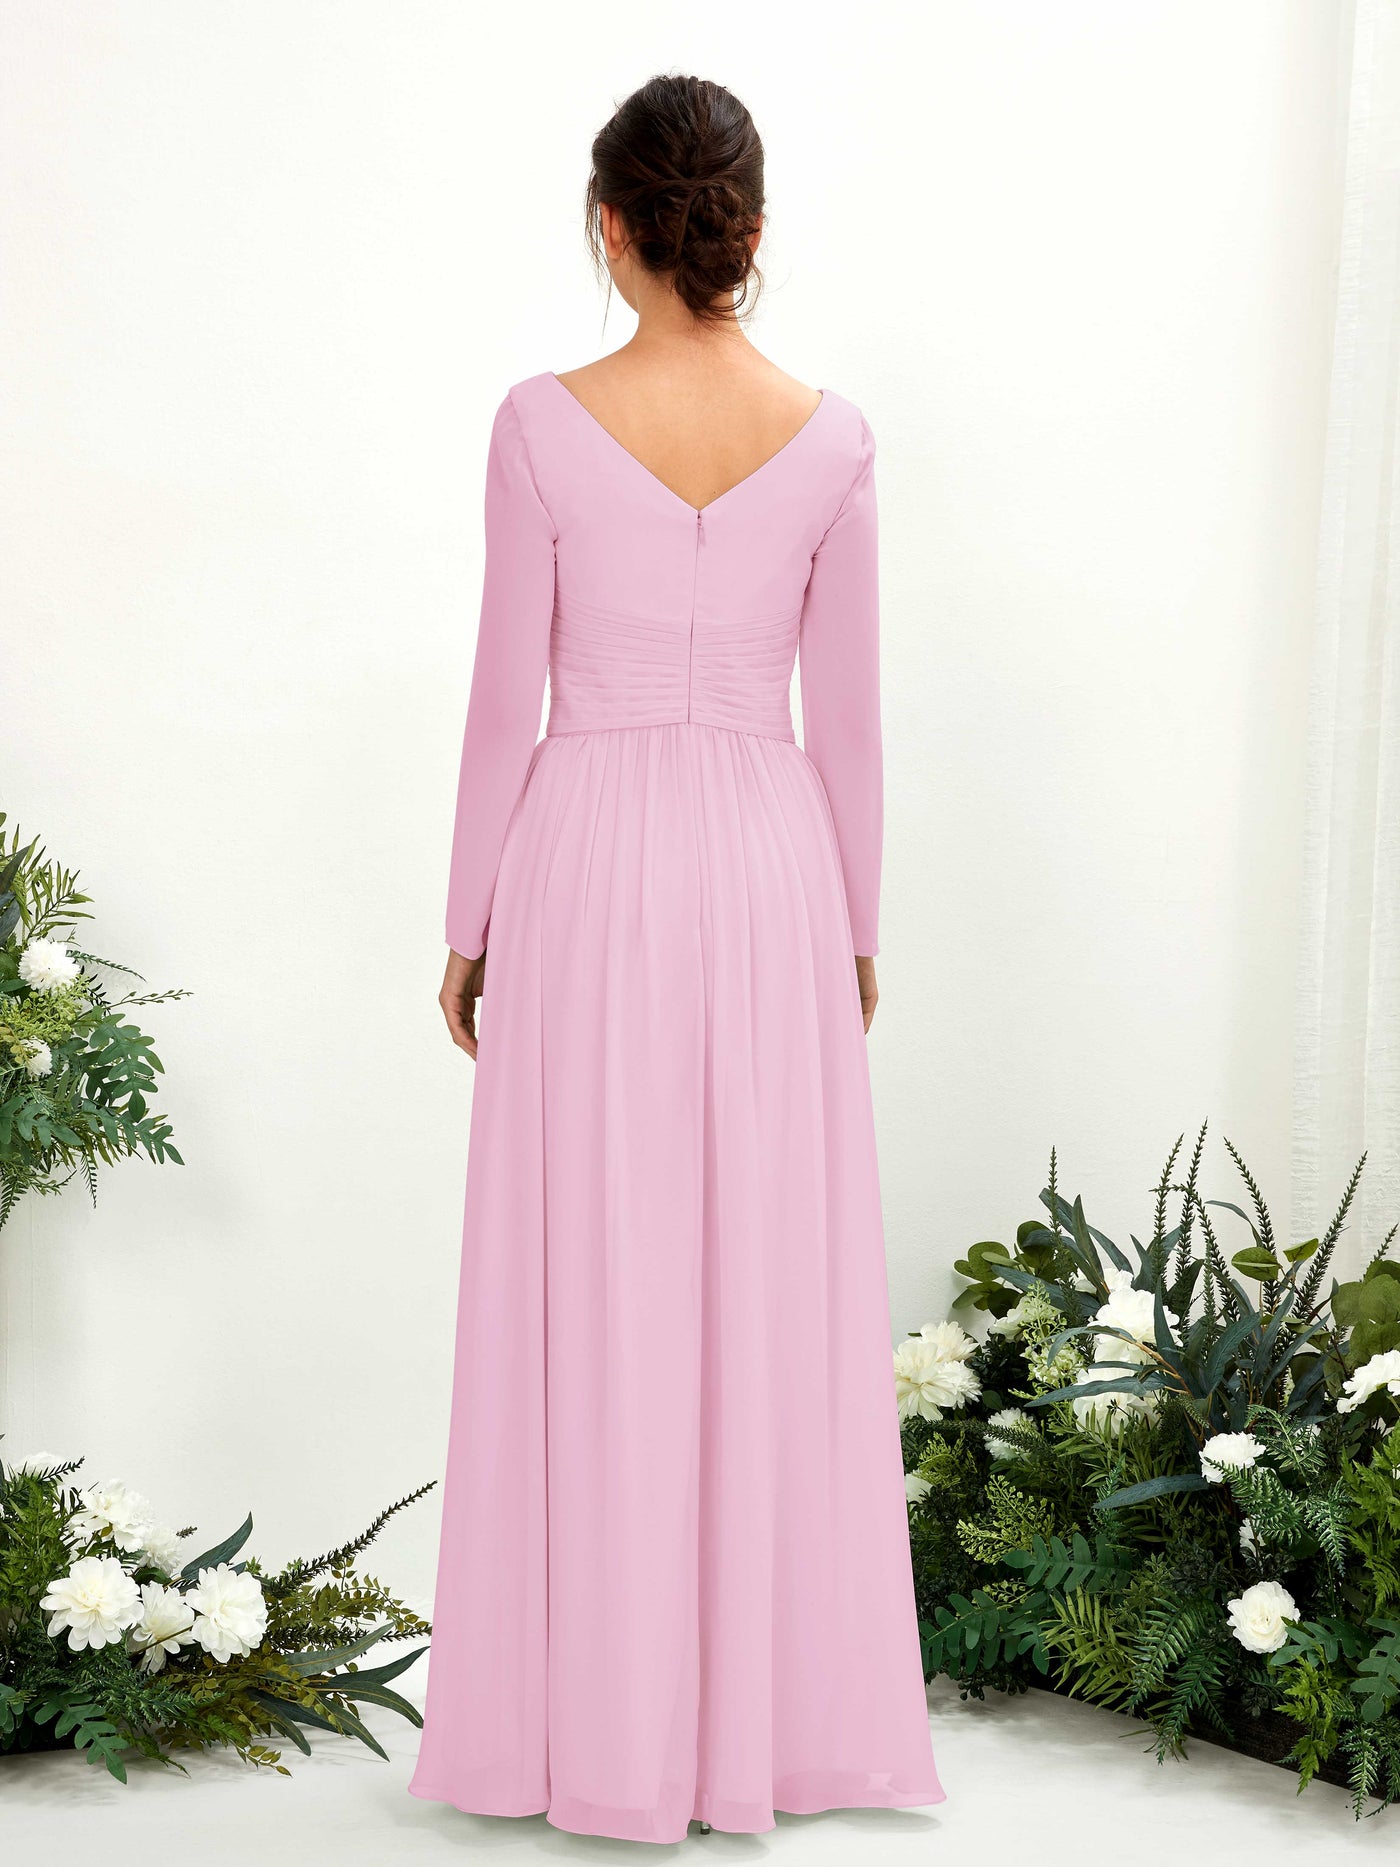 Candy Pink Bridesmaid Dresses Bridesmaid Dress A-line Chiffon V-neck Full Length Long Sleeves Wedding Party Dress (81220339)#color_candy-pink